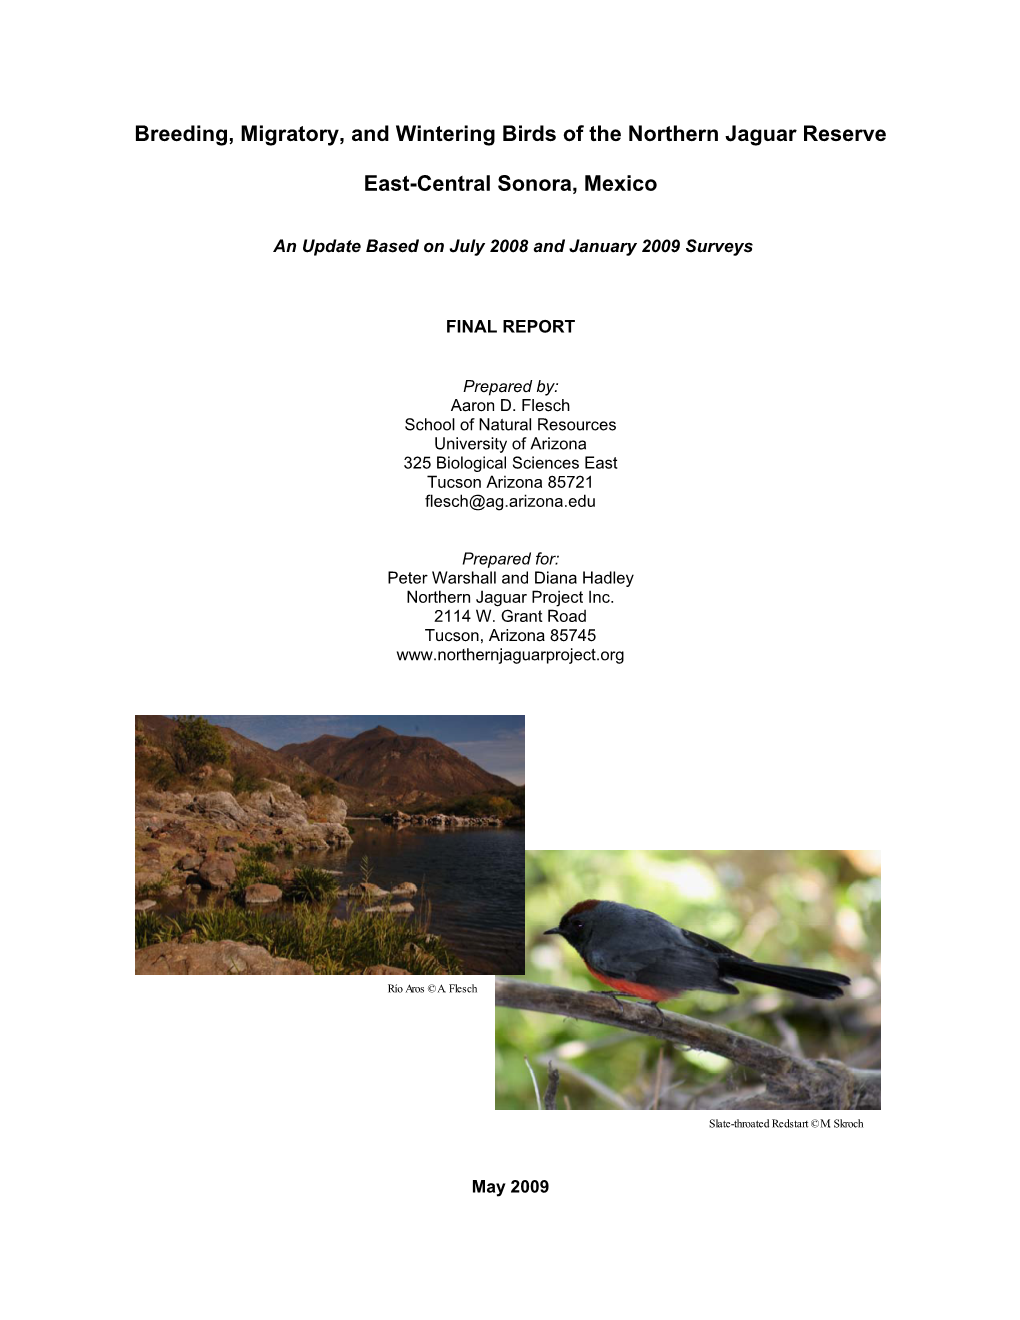 Breeding, Migratory, and Wintering Birds of the Northern Jaguar Reserve